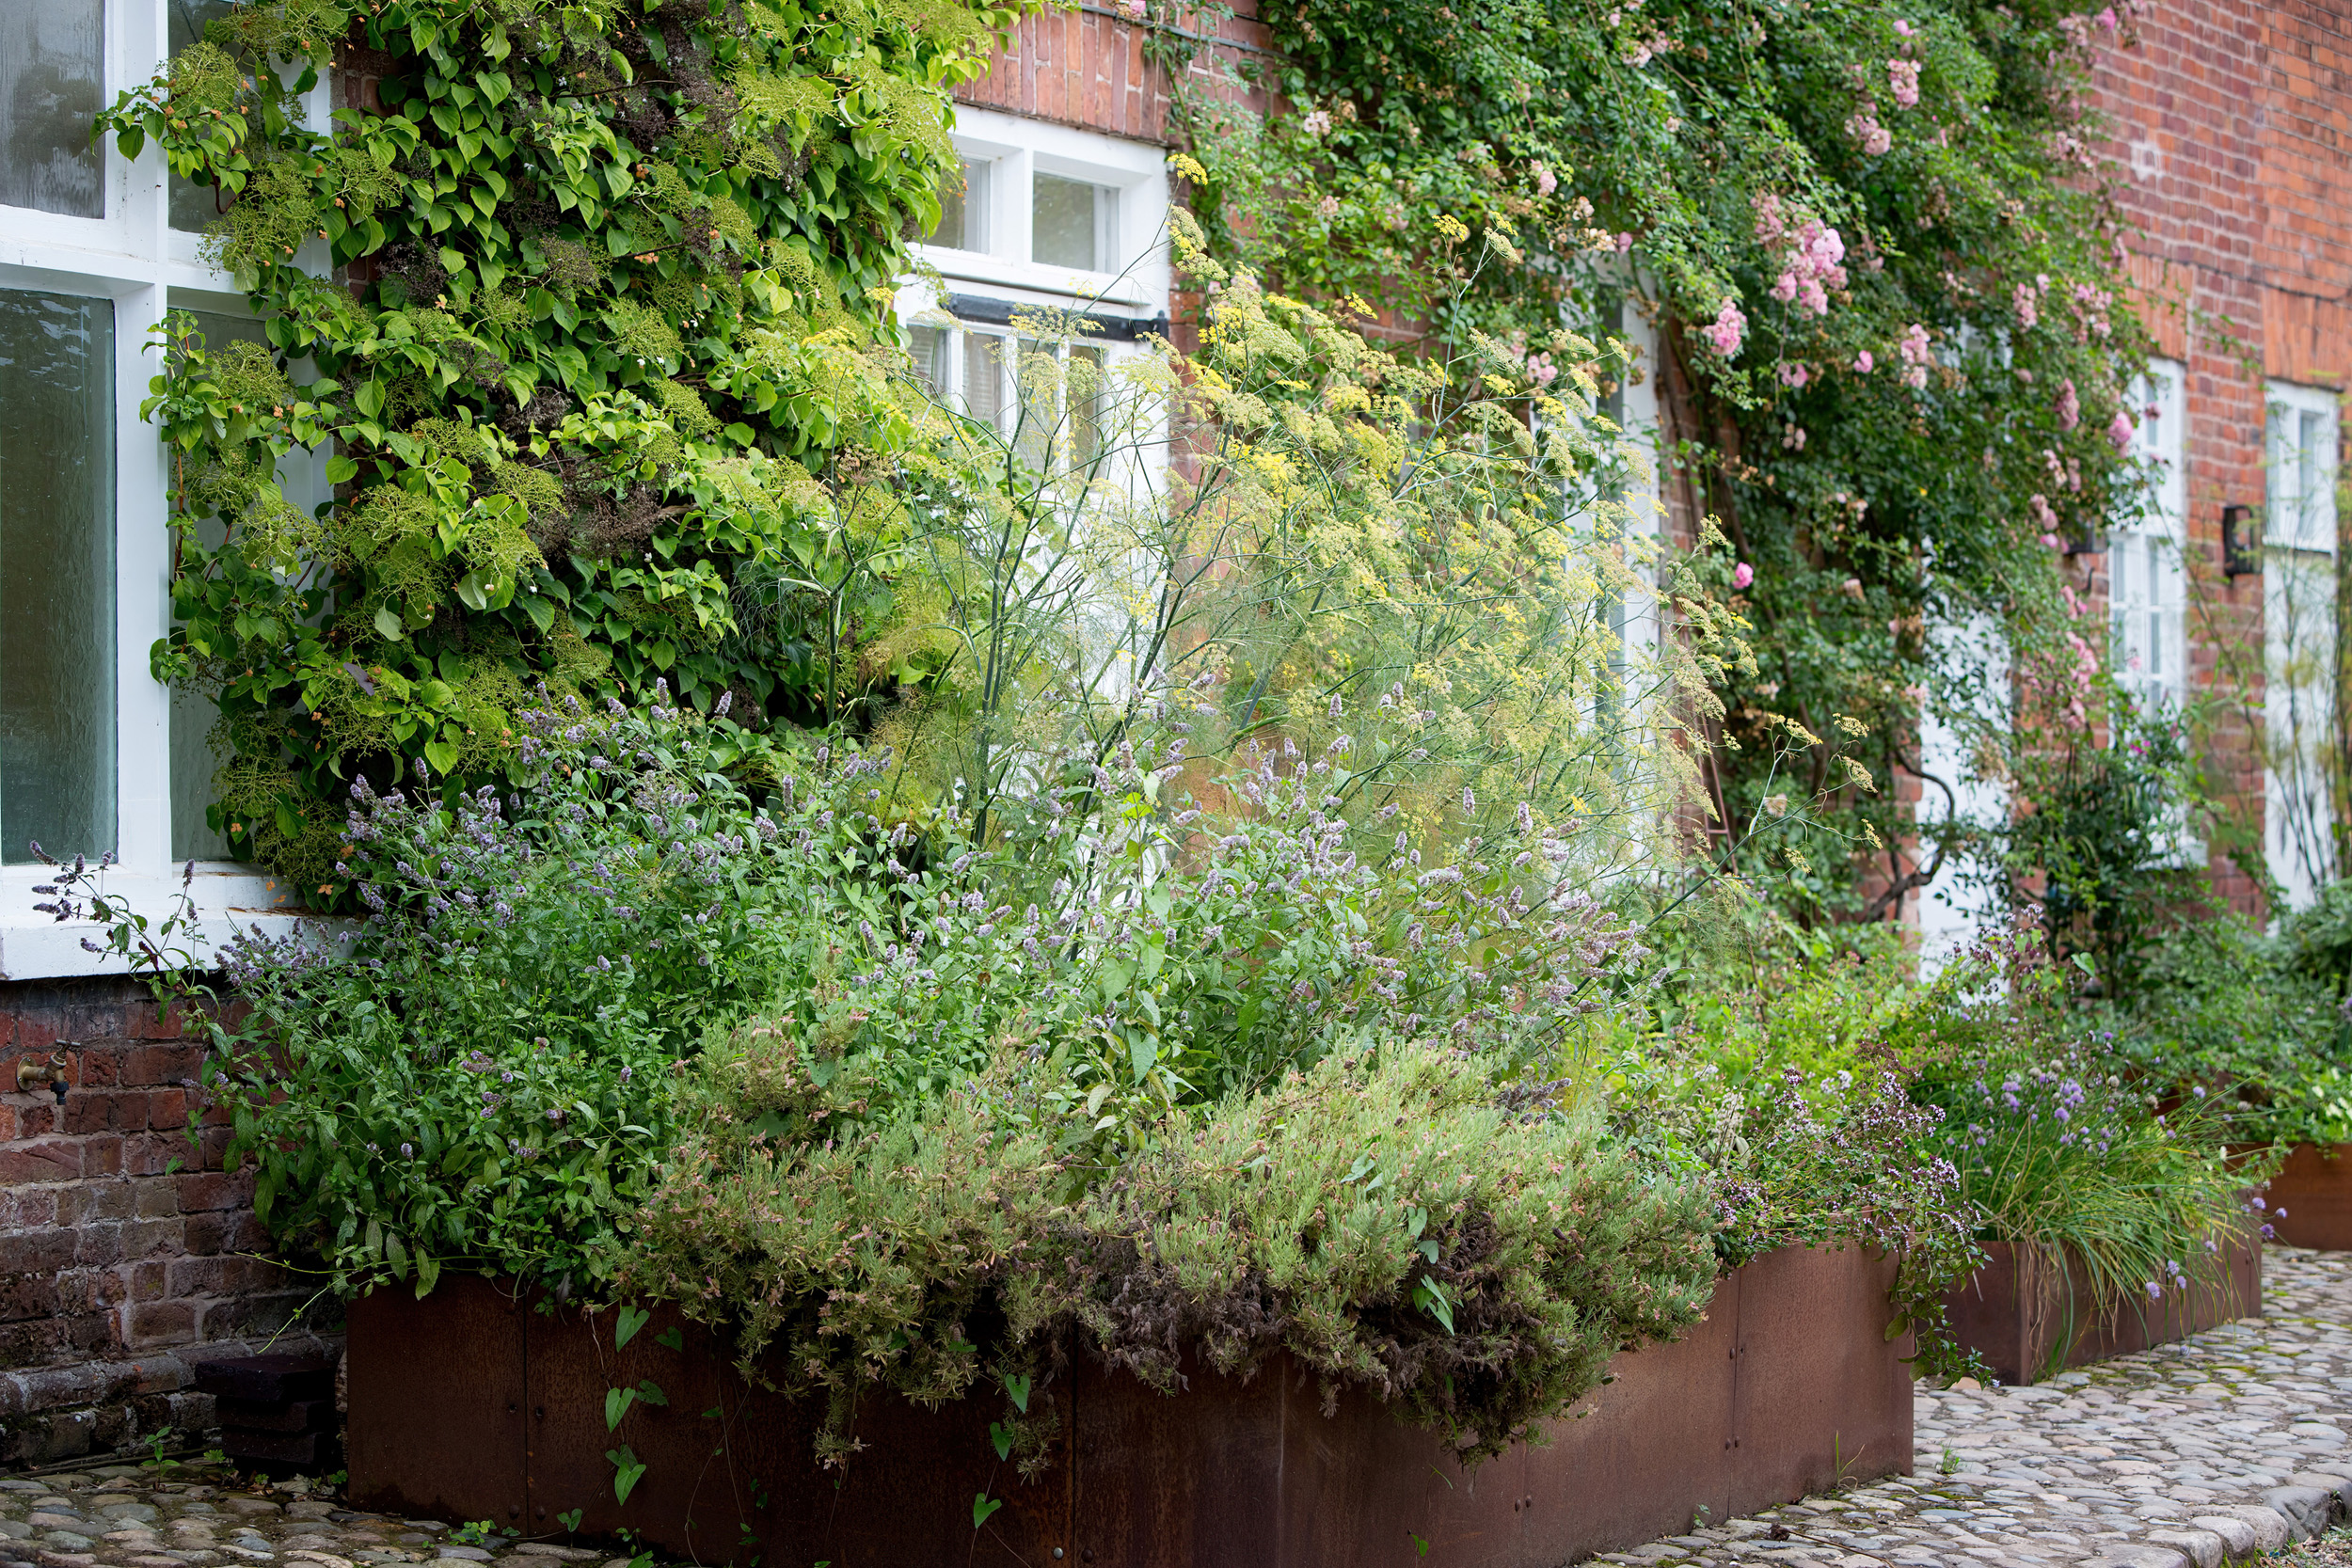 A mass of naturalistic planting in corten steel planters